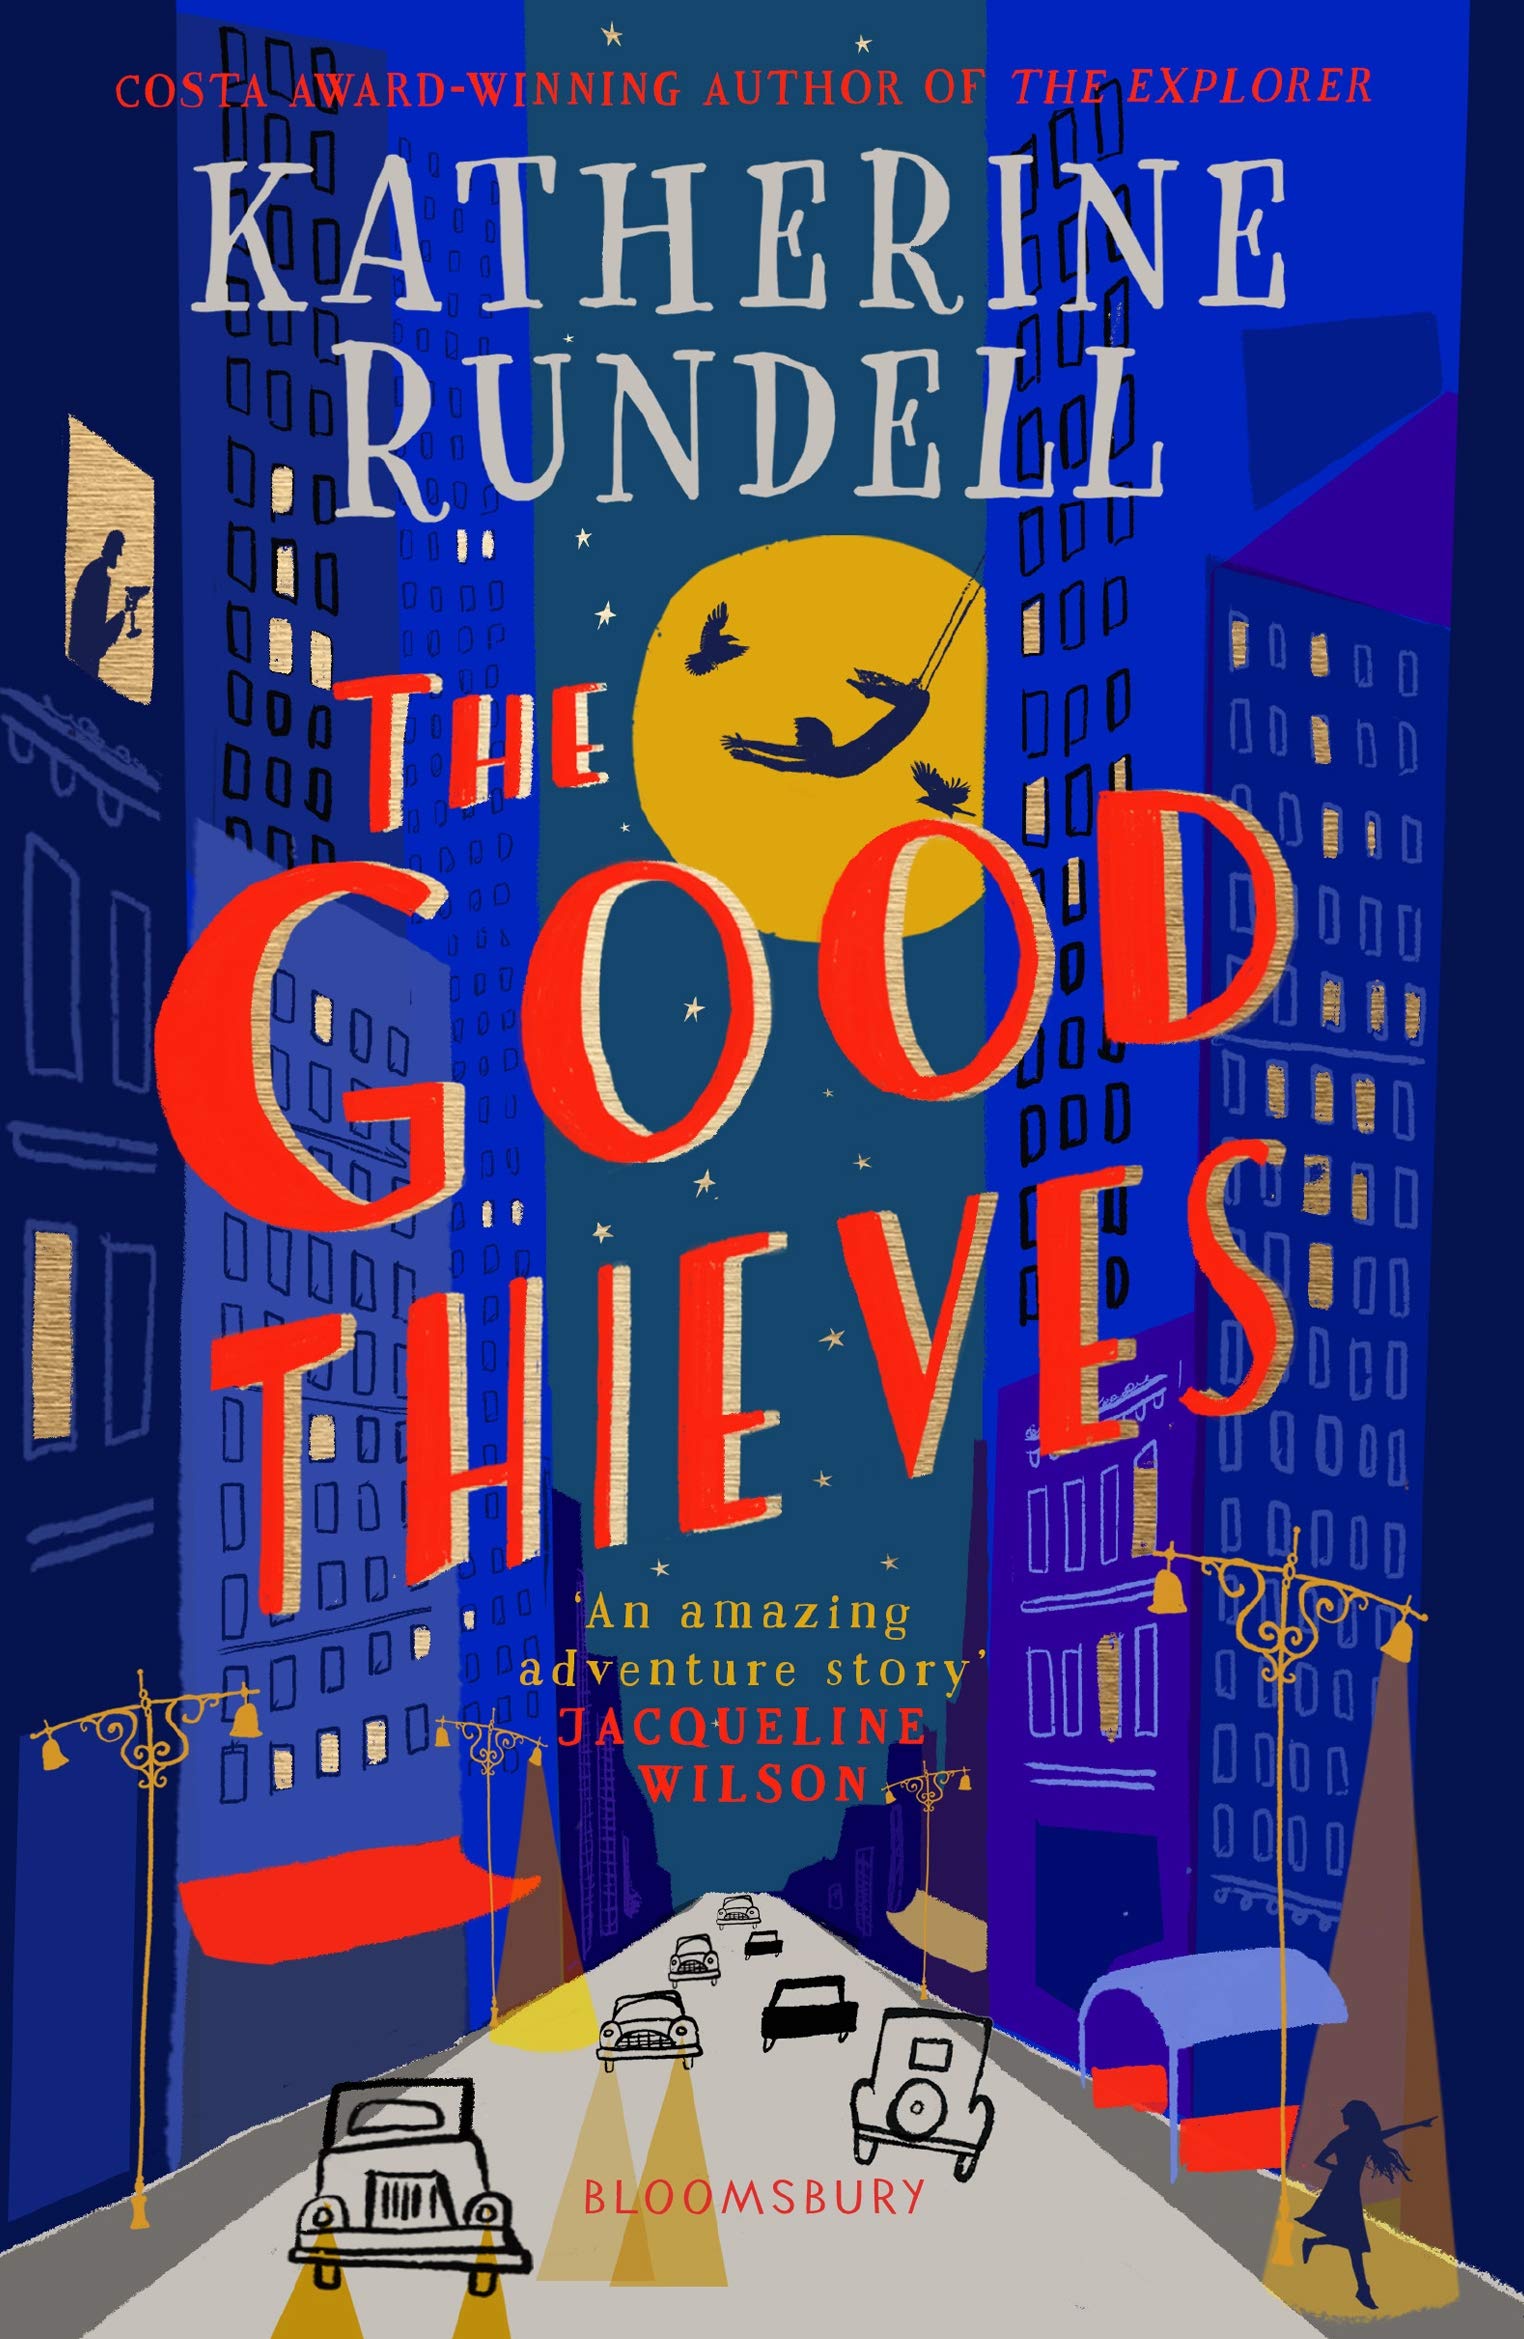 The Good Thieves | Katherine Rundell